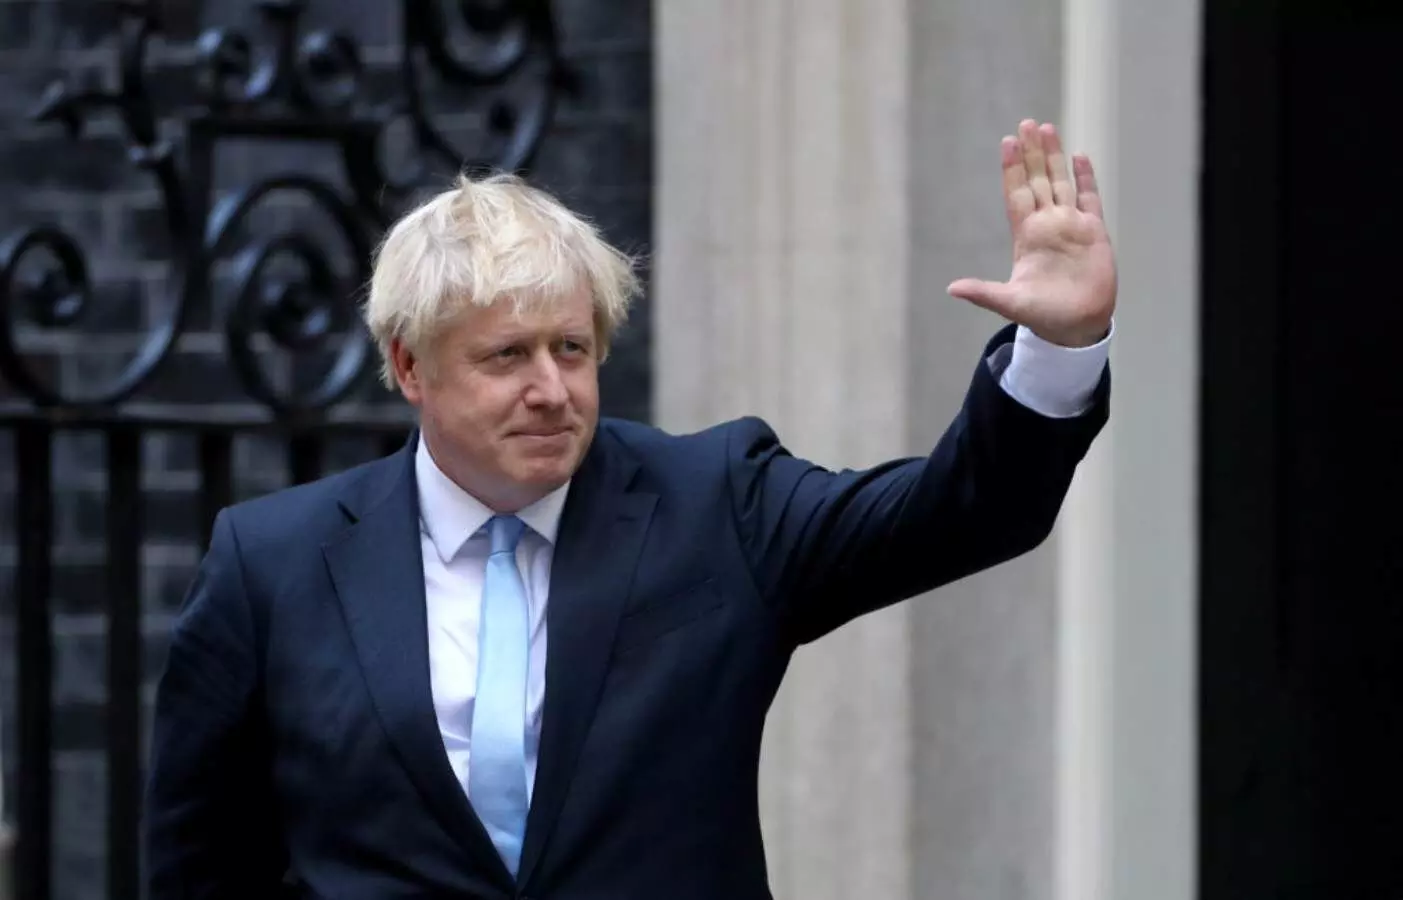 boris johnson in race for british prime minister again after liz truss resigns